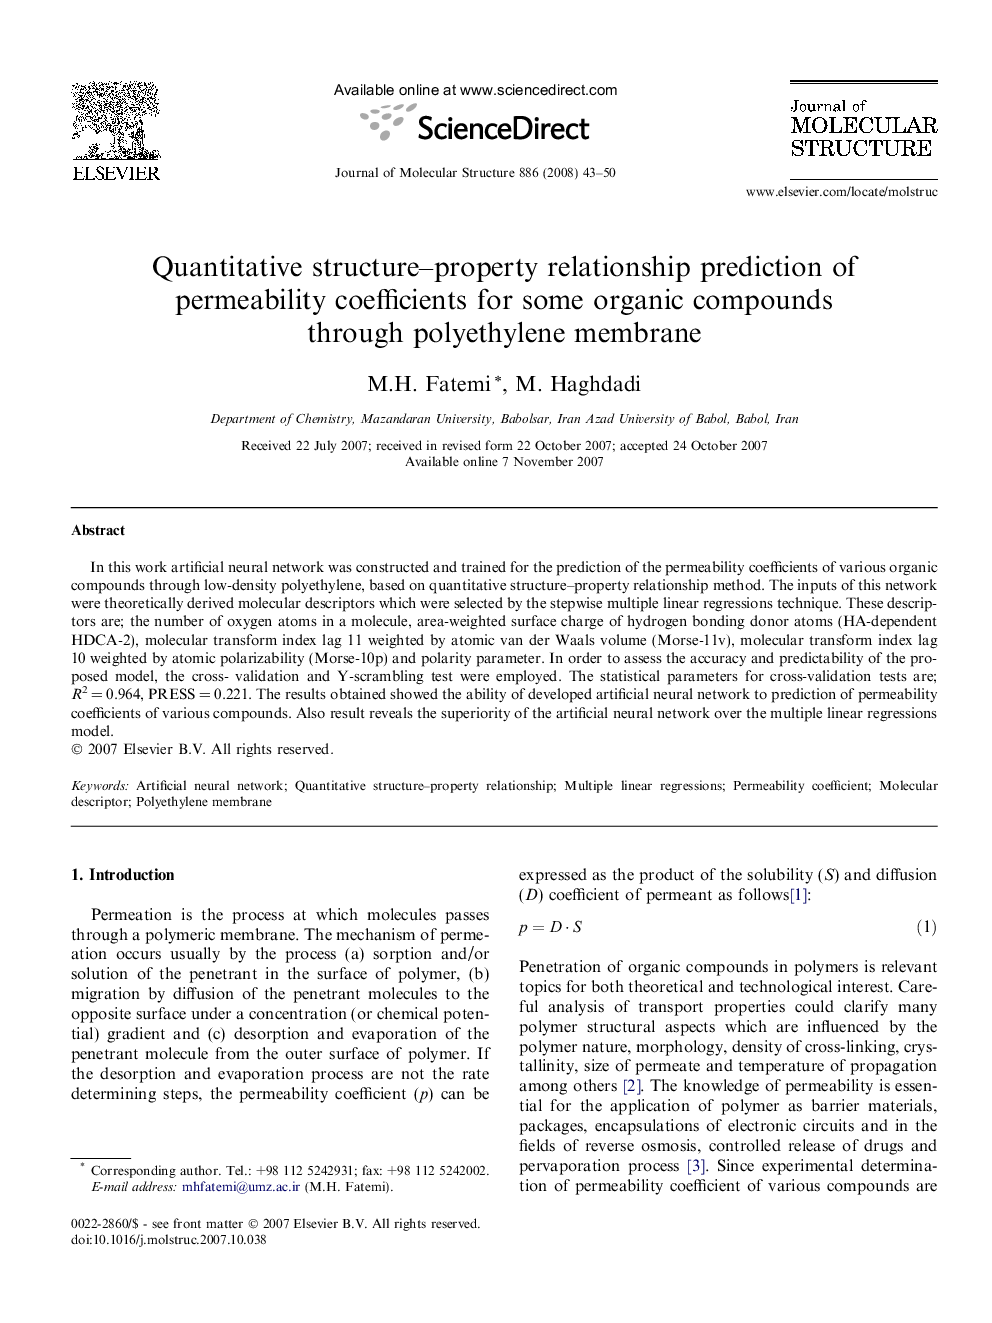 Quantitative structure–property relationship prediction of permeability coefficients for some organic compounds through polyethylene membrane